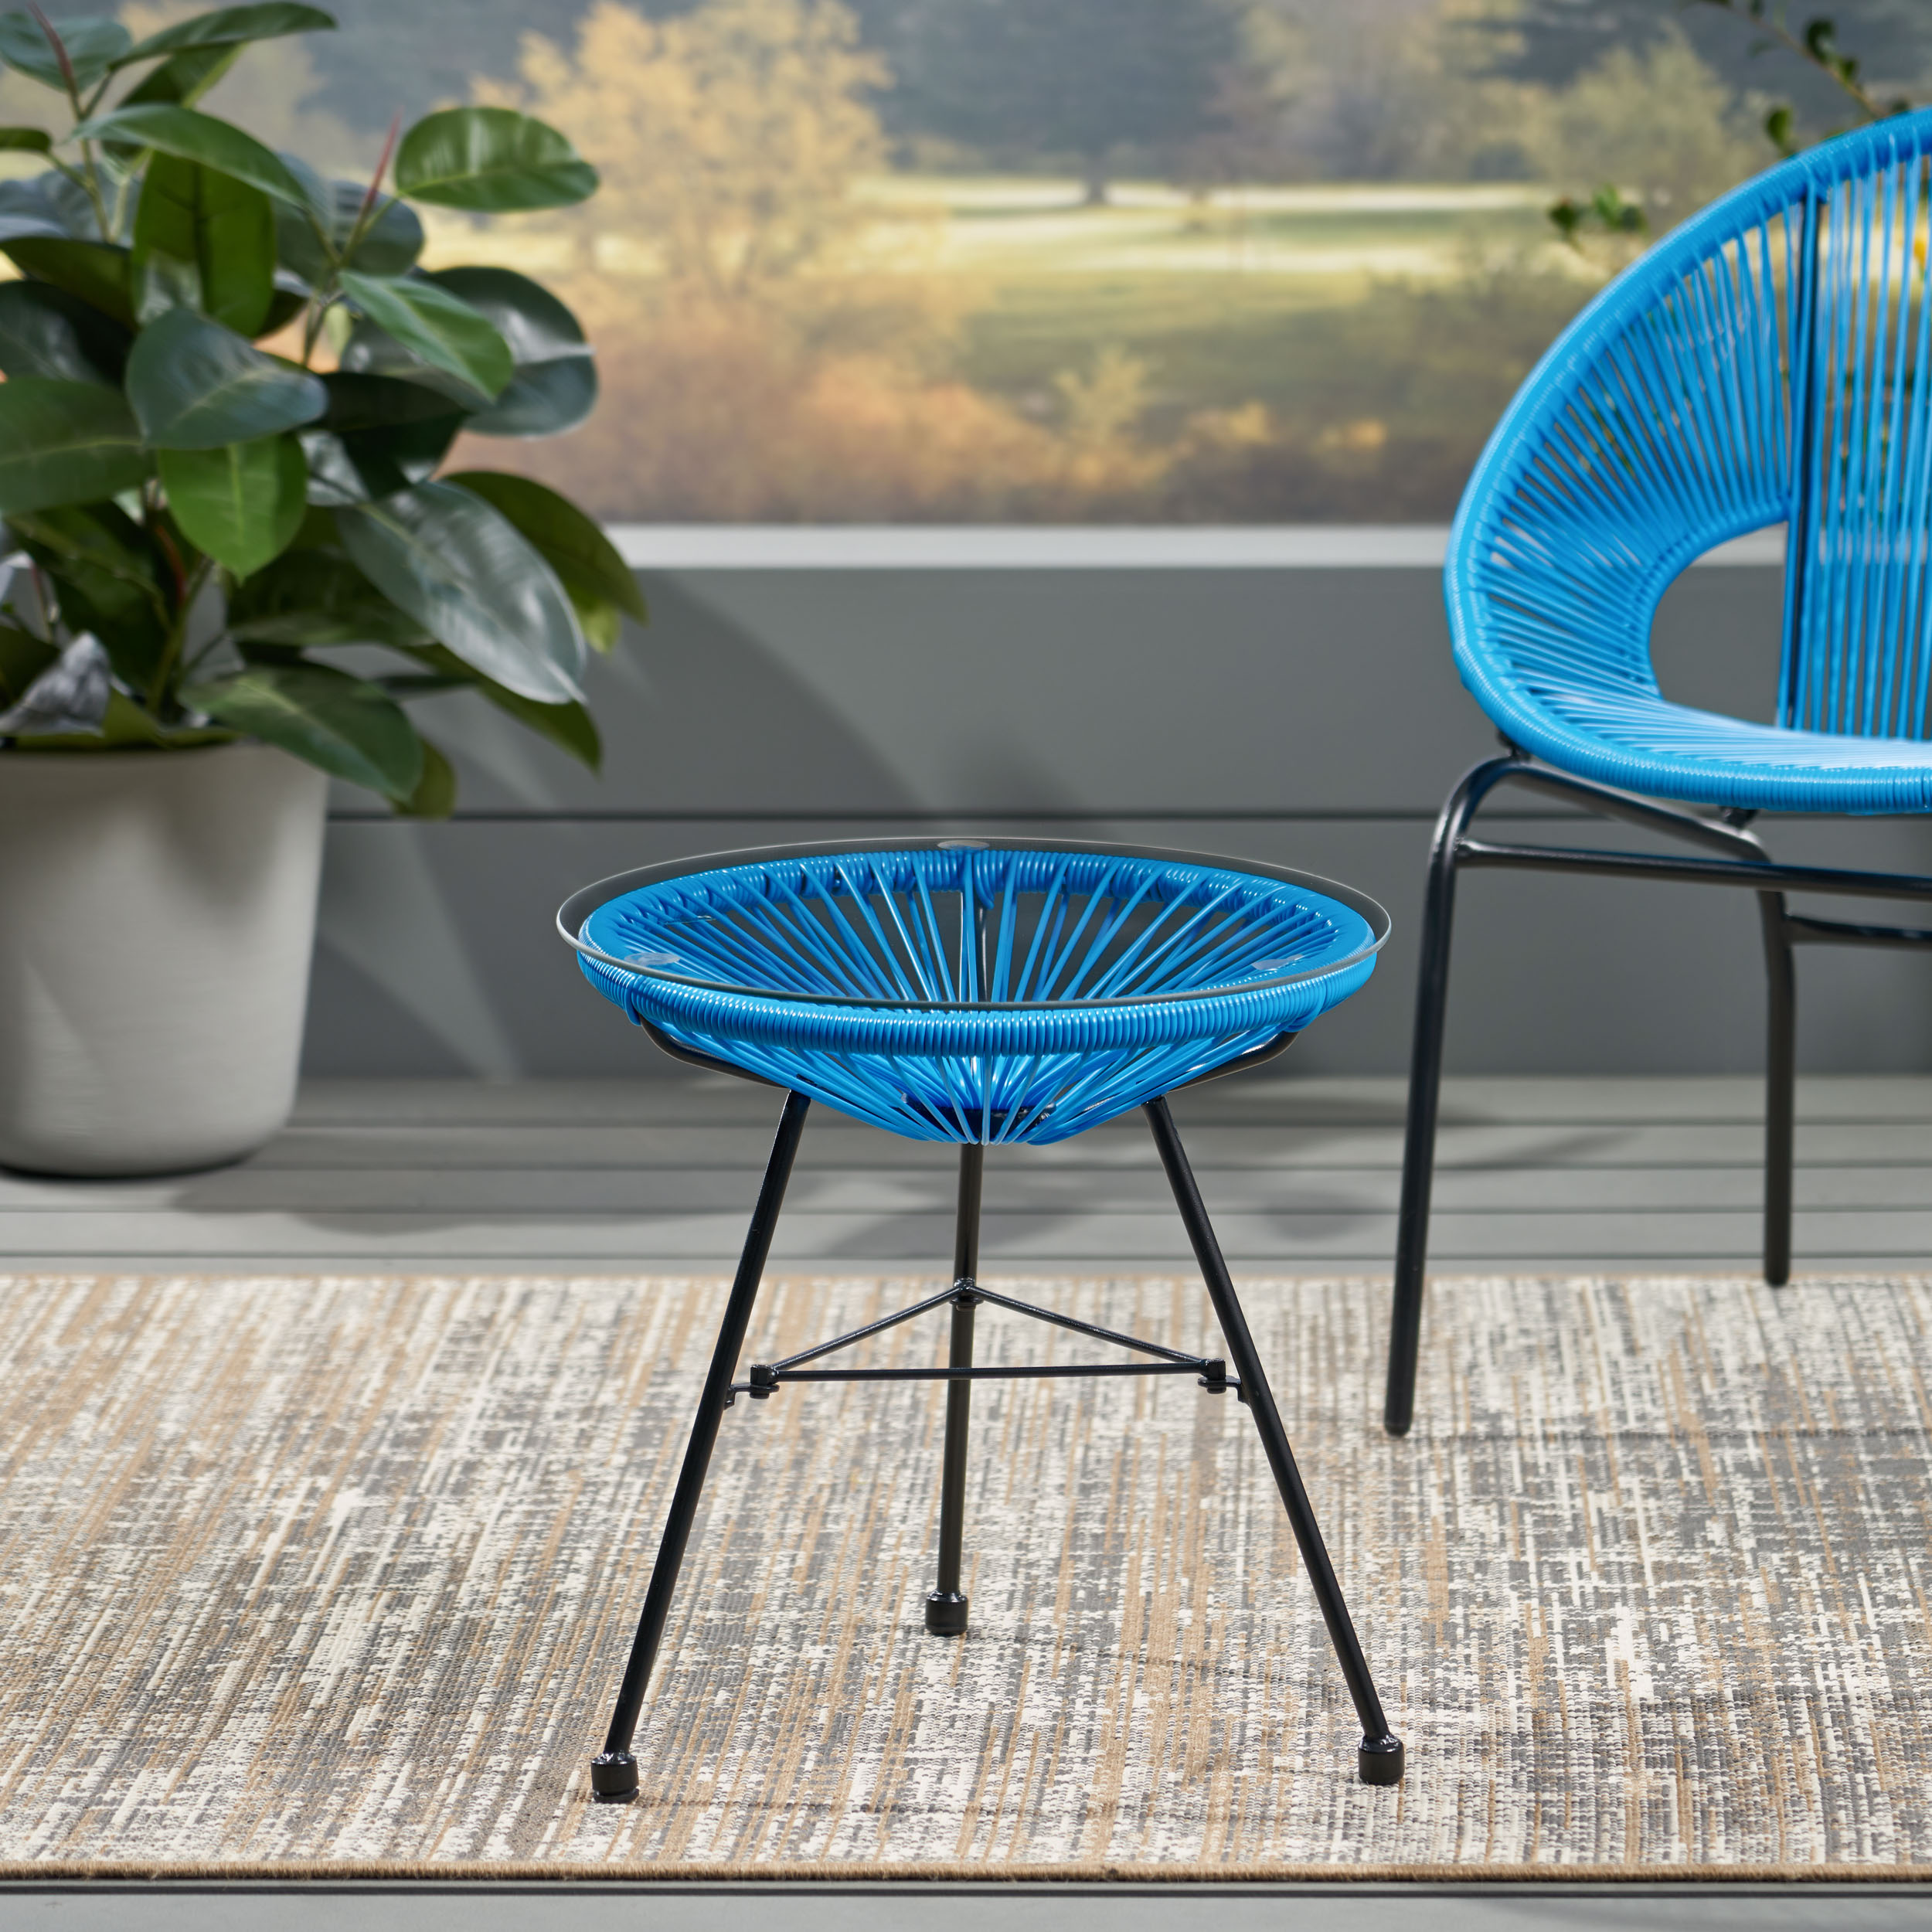 GDF Studio Chrissy Outdoor Modern Faux Rattan Side Table with Tempered Glass Top, Blue and Black - image 1 of 9